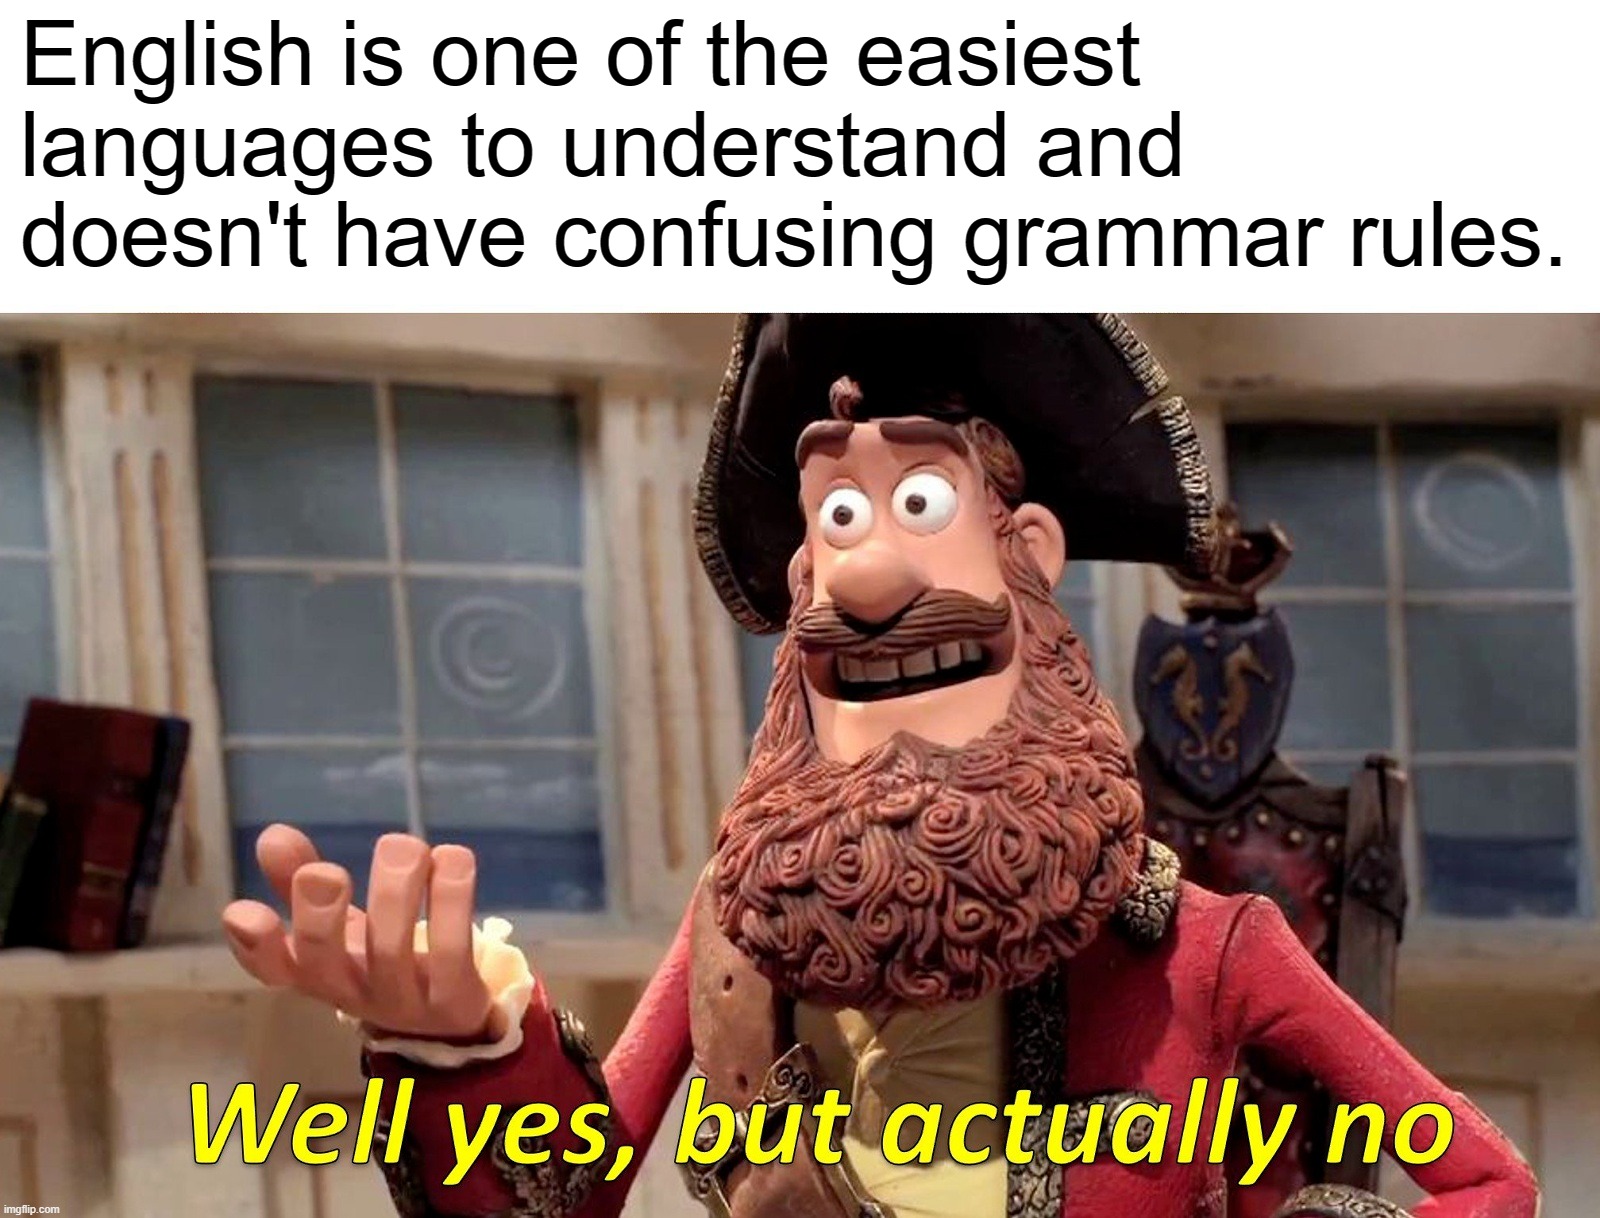 I Like To Thank ChristianMoore2  For Inspiration In Making This Meme | English is one of the easiest languages to understand and doesn't have confusing grammar rules. | image tagged in funny,memes,well yes but actually no,english,grammar,christianmoore2 | made w/ Imgflip meme maker